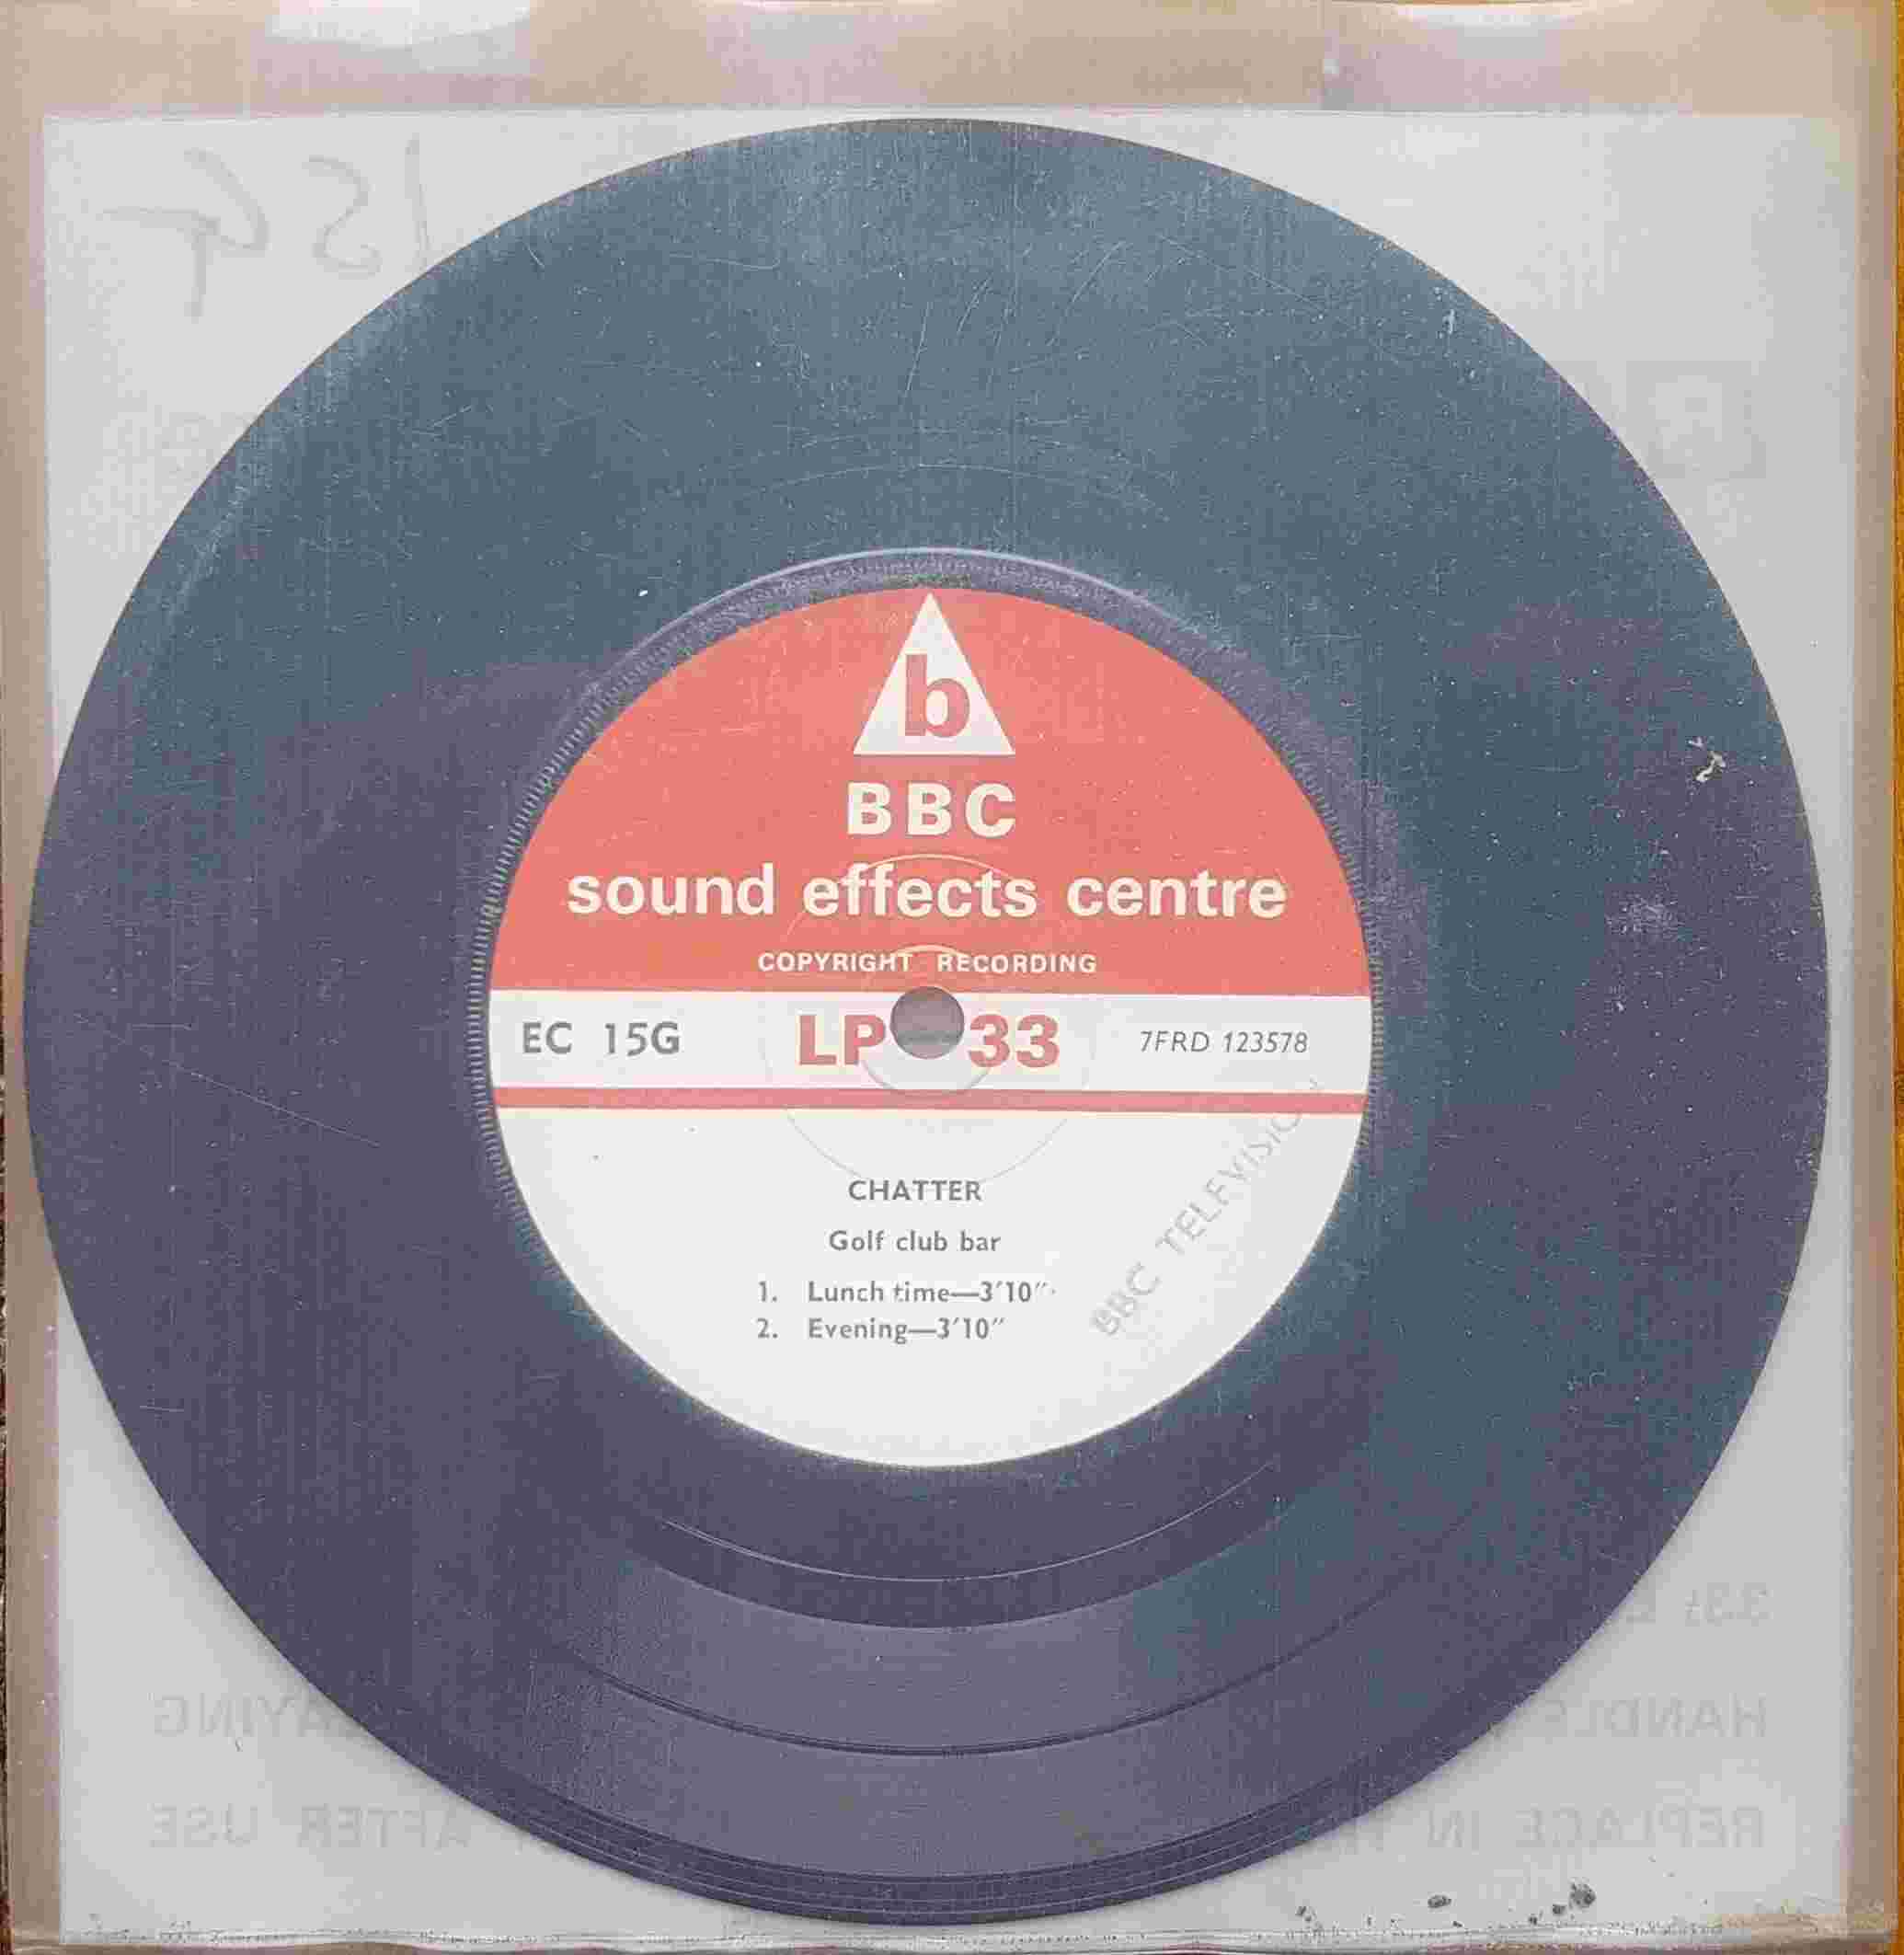 Picture of EC 15G Chatter by artist Not registered from the BBC records and Tapes library